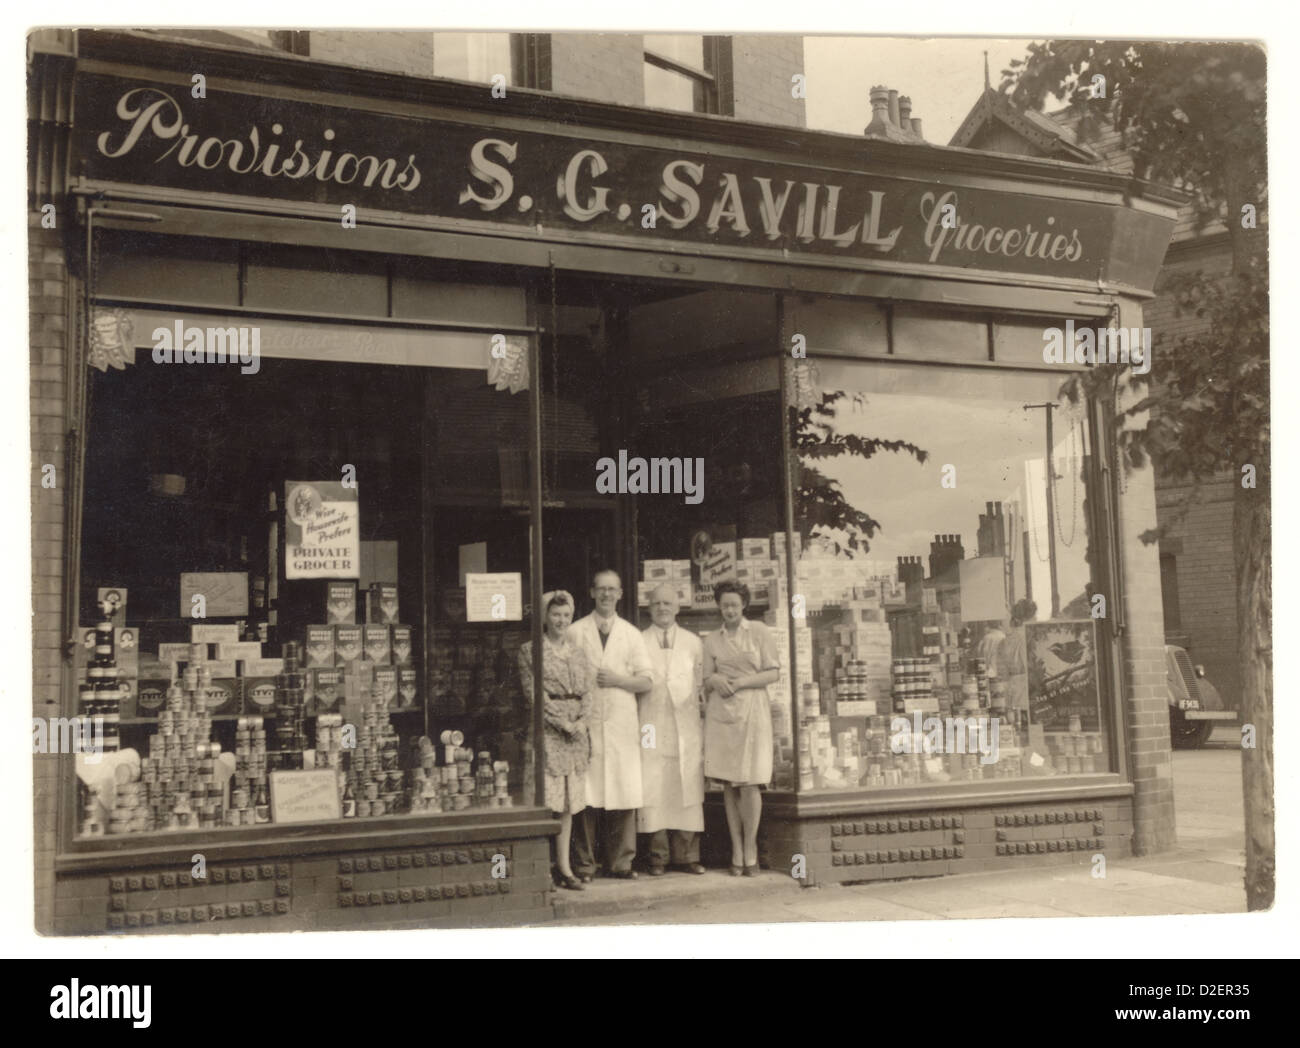 Original photograph of S.C. Savill Groceries and Provisions shop, with proprietor/ owner and staff - goods displayed in window, in the 1930's or 1940's, U.K. Stock Photo